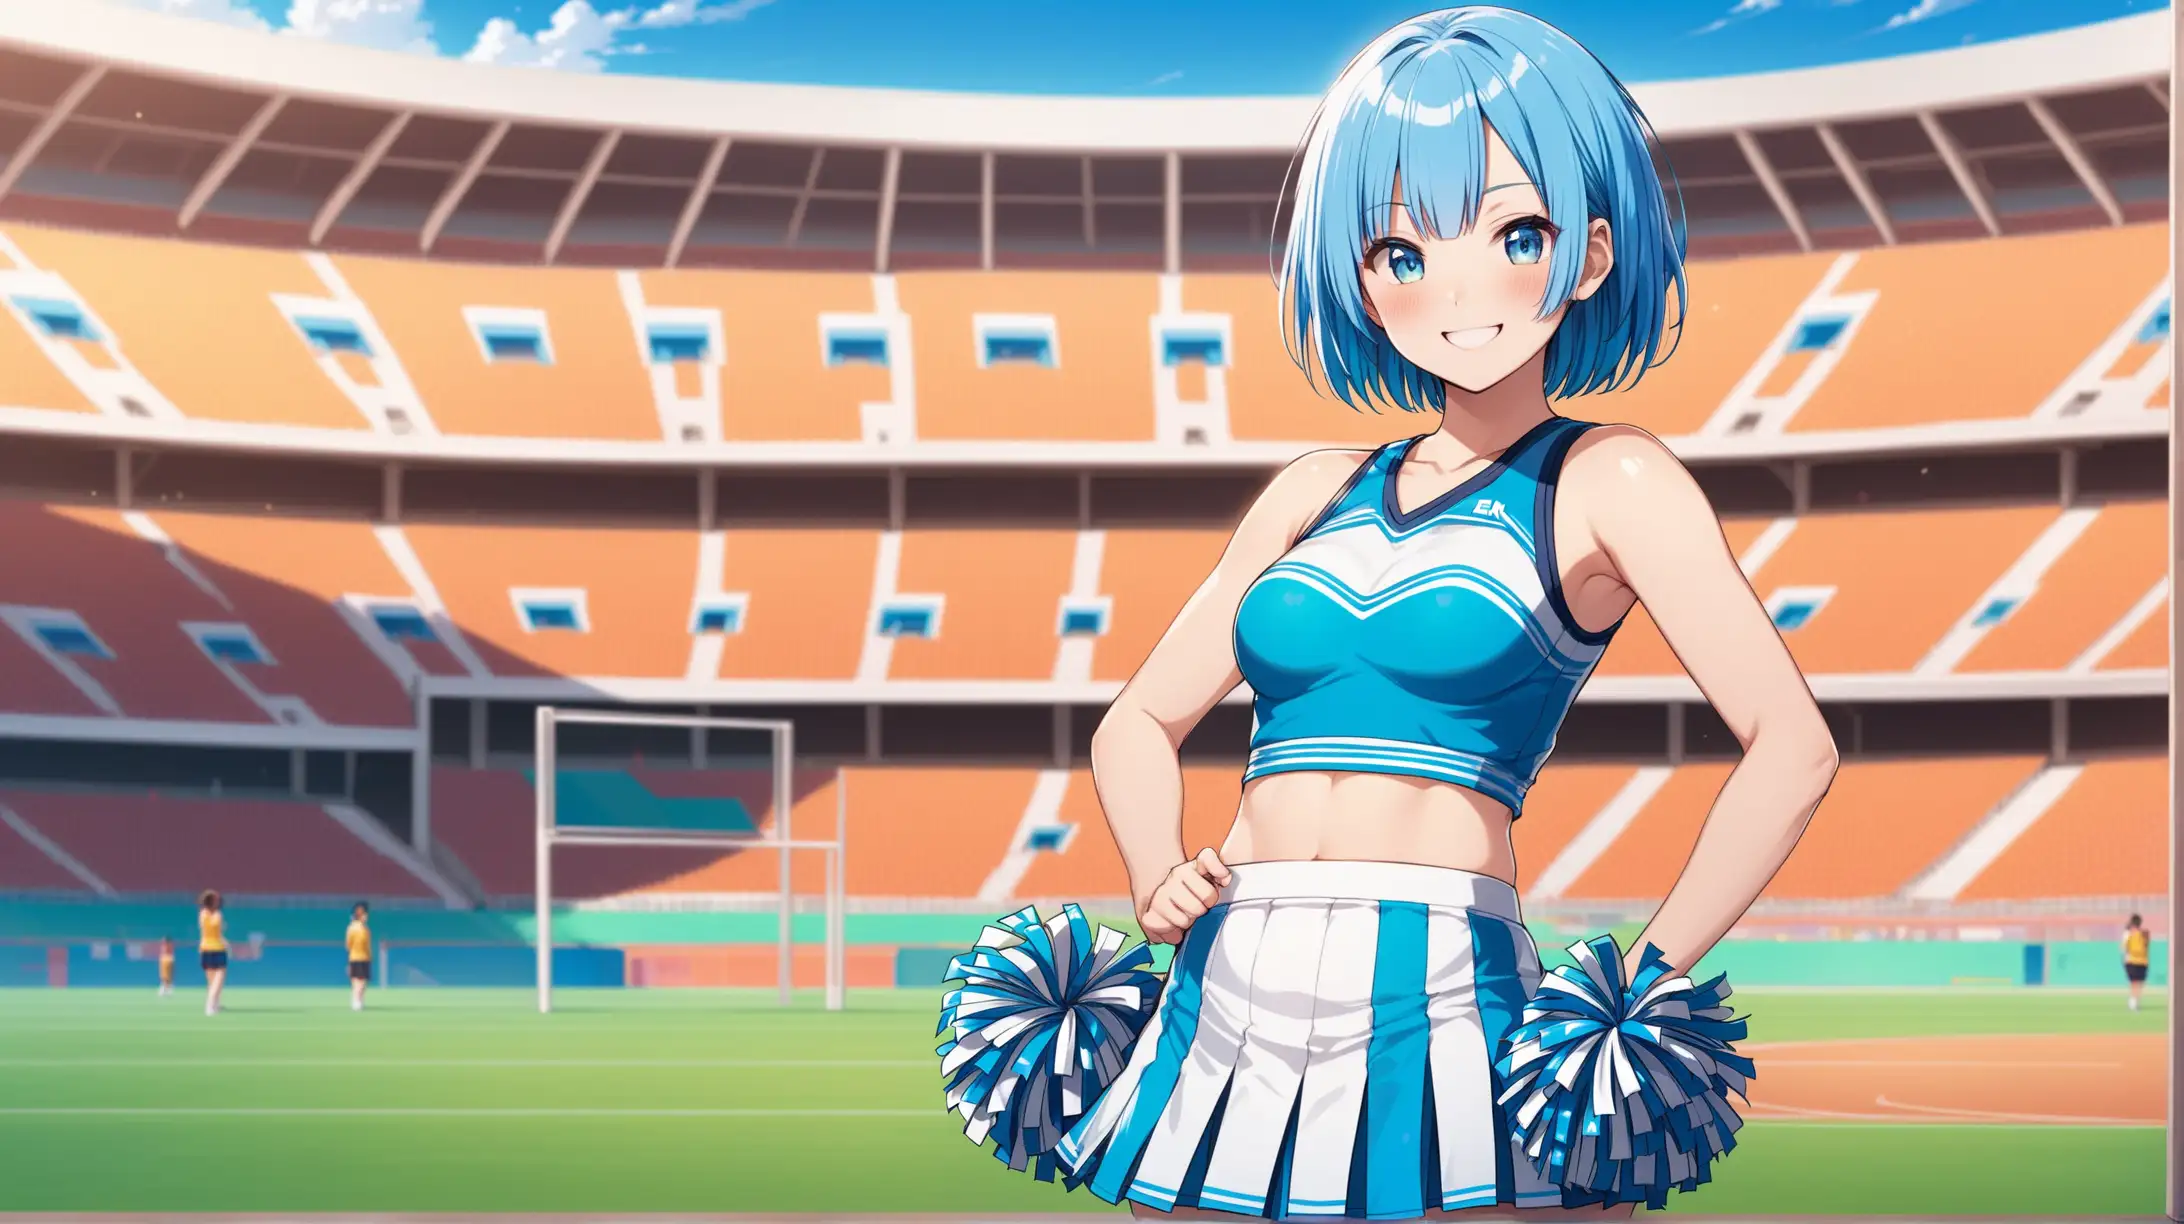 Draw the character Rem, high quality, outdoors, in a sports stadium, standing in a confident pose, wearing a cheerleading outfit, smiling at the viewer